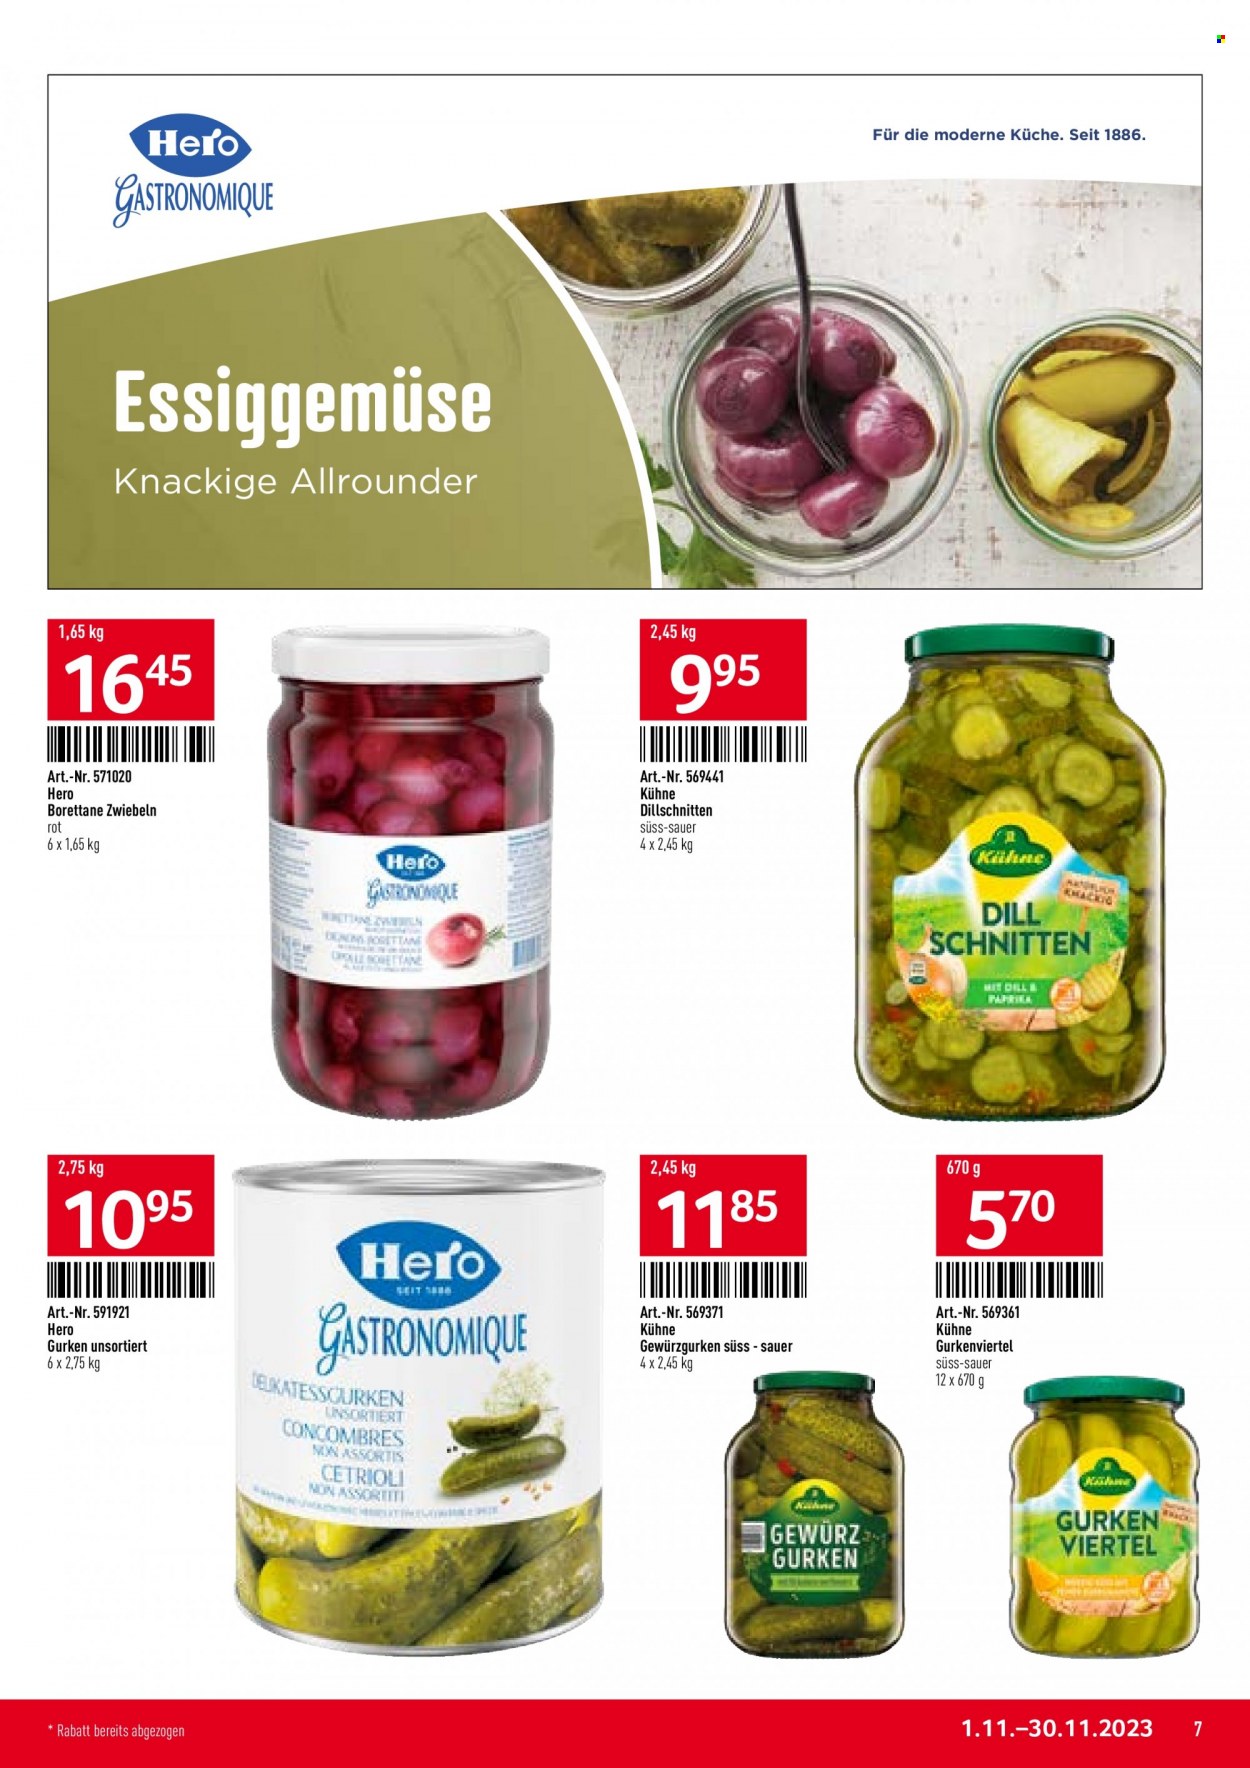 Catalogue TransGourmet - 1.11.2023 - 30.11.2023. Page 7.